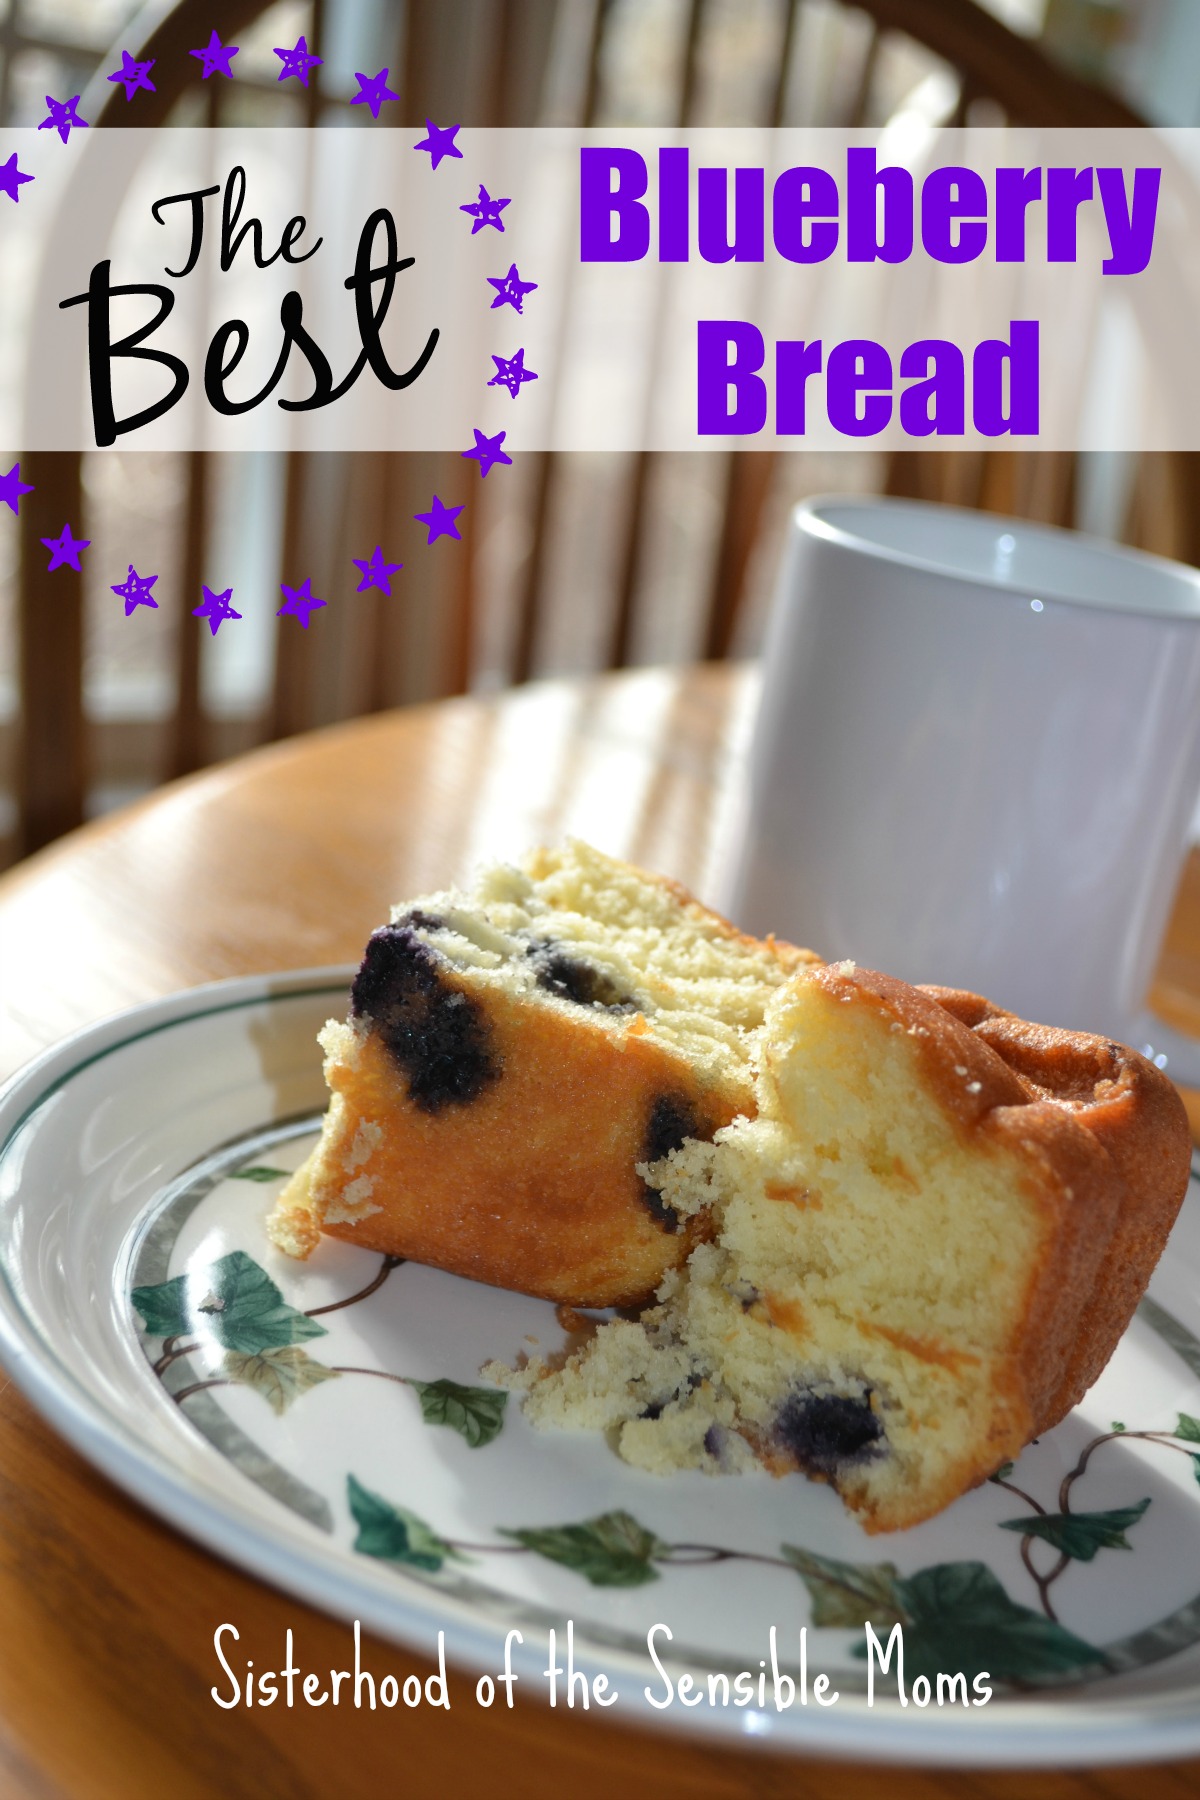 Looking for a delicious breakfast treat? Check out The Best Blueberry Bread | Sisterhood of the Sensible Moms